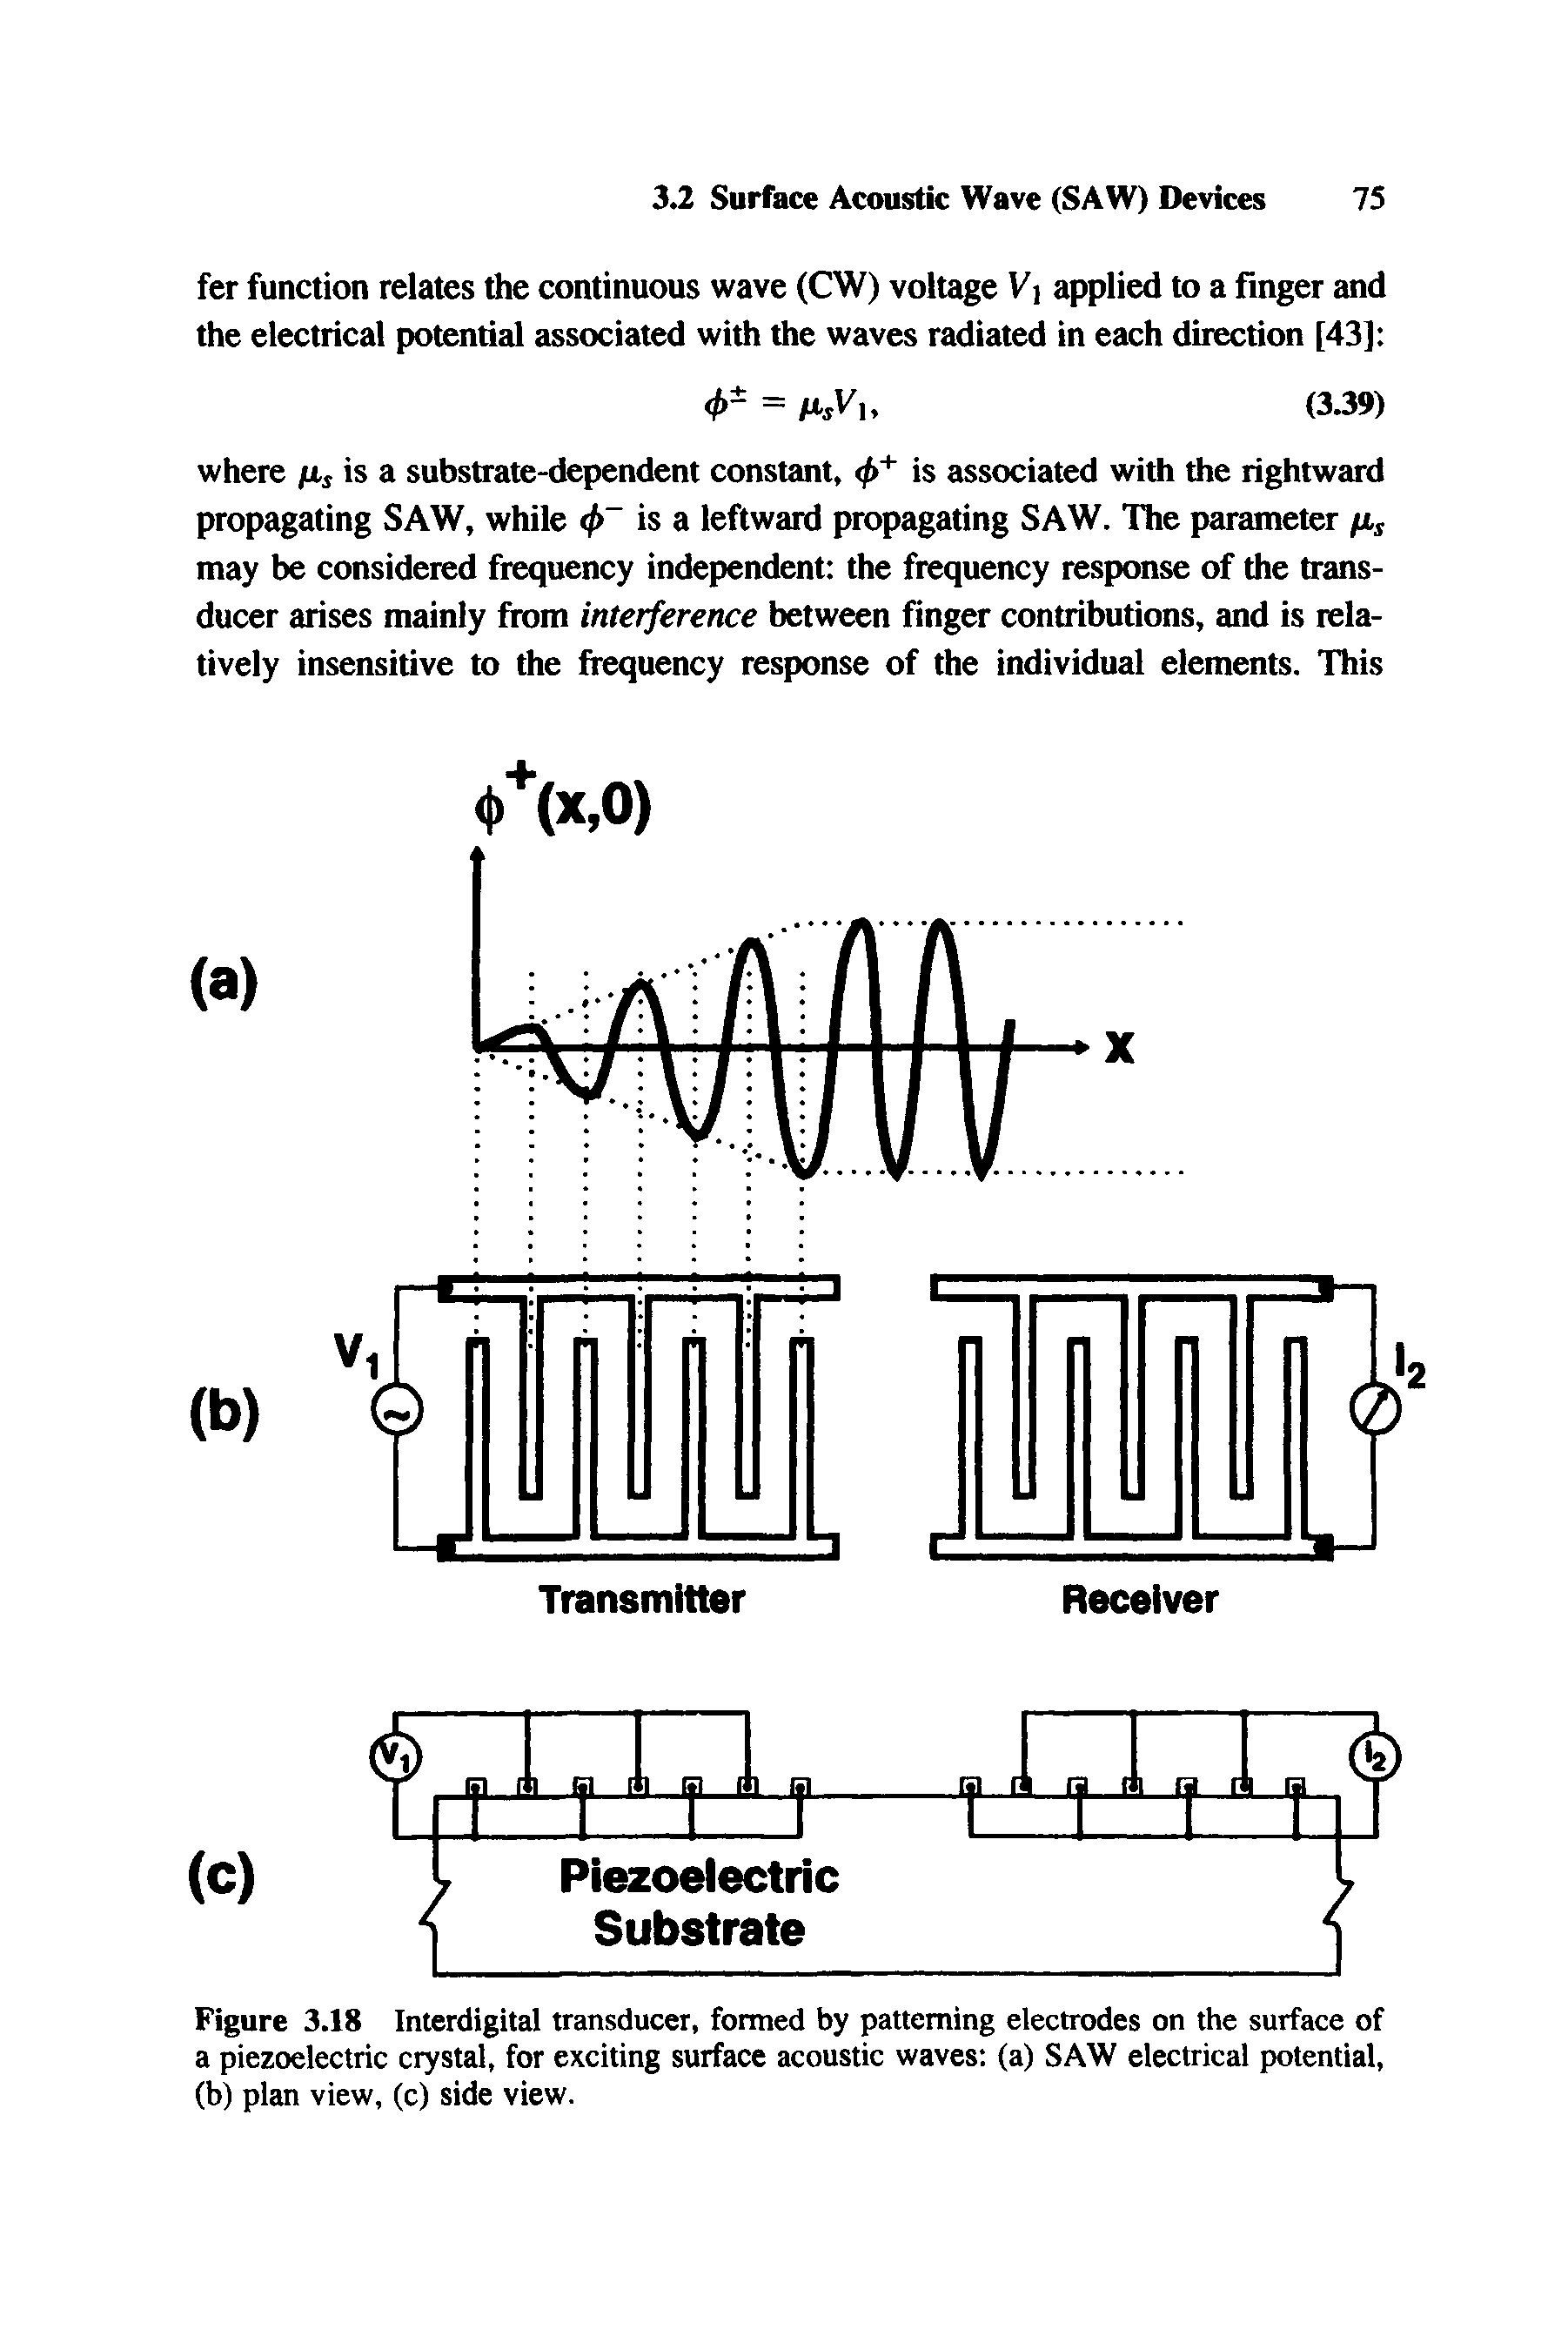 Figure 3.18 Interdigital transducer, formed by patterning electrodes on the surface of a piezoelectric crystal, for exciting surface acoustic waves (a) SAW electrical potential,...